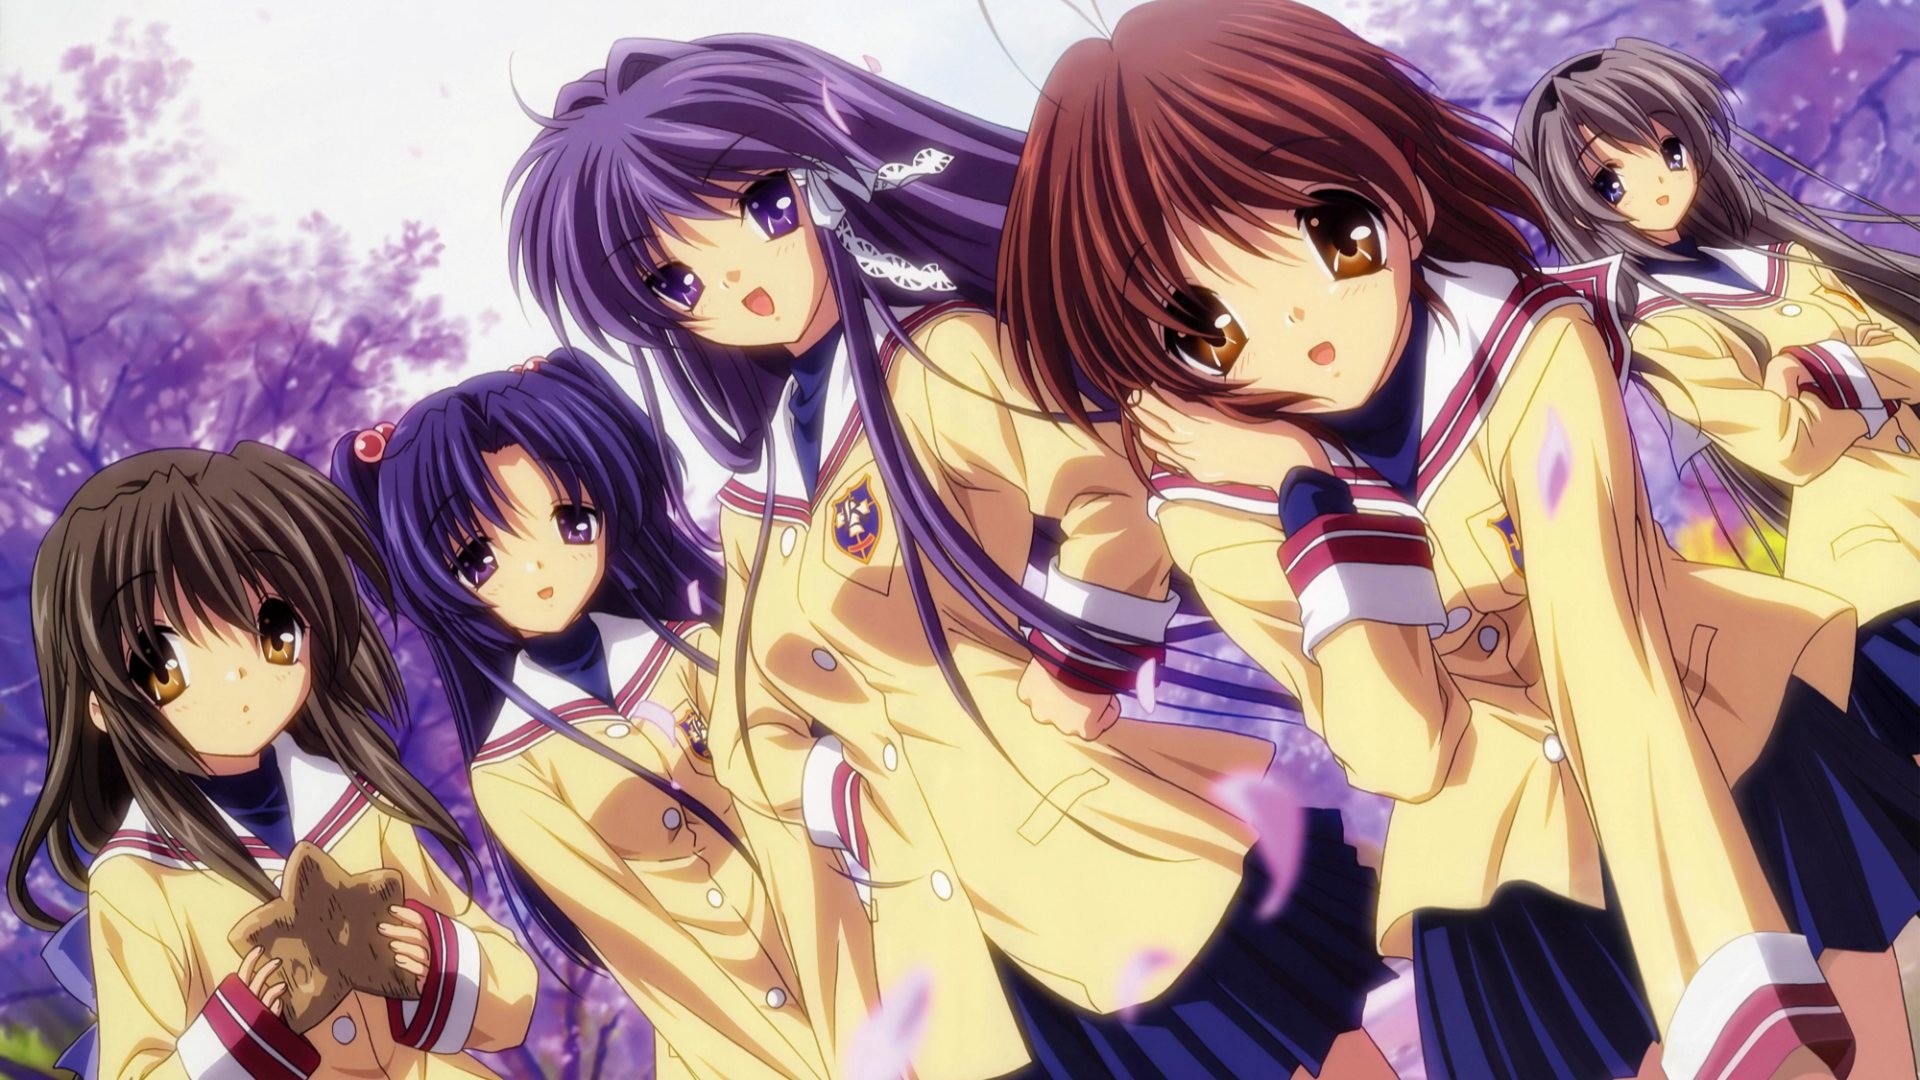 1920x1080 KEY's most popular work; Clannad and Clannad After Story are known to make  even the most heartless of weebs cry.